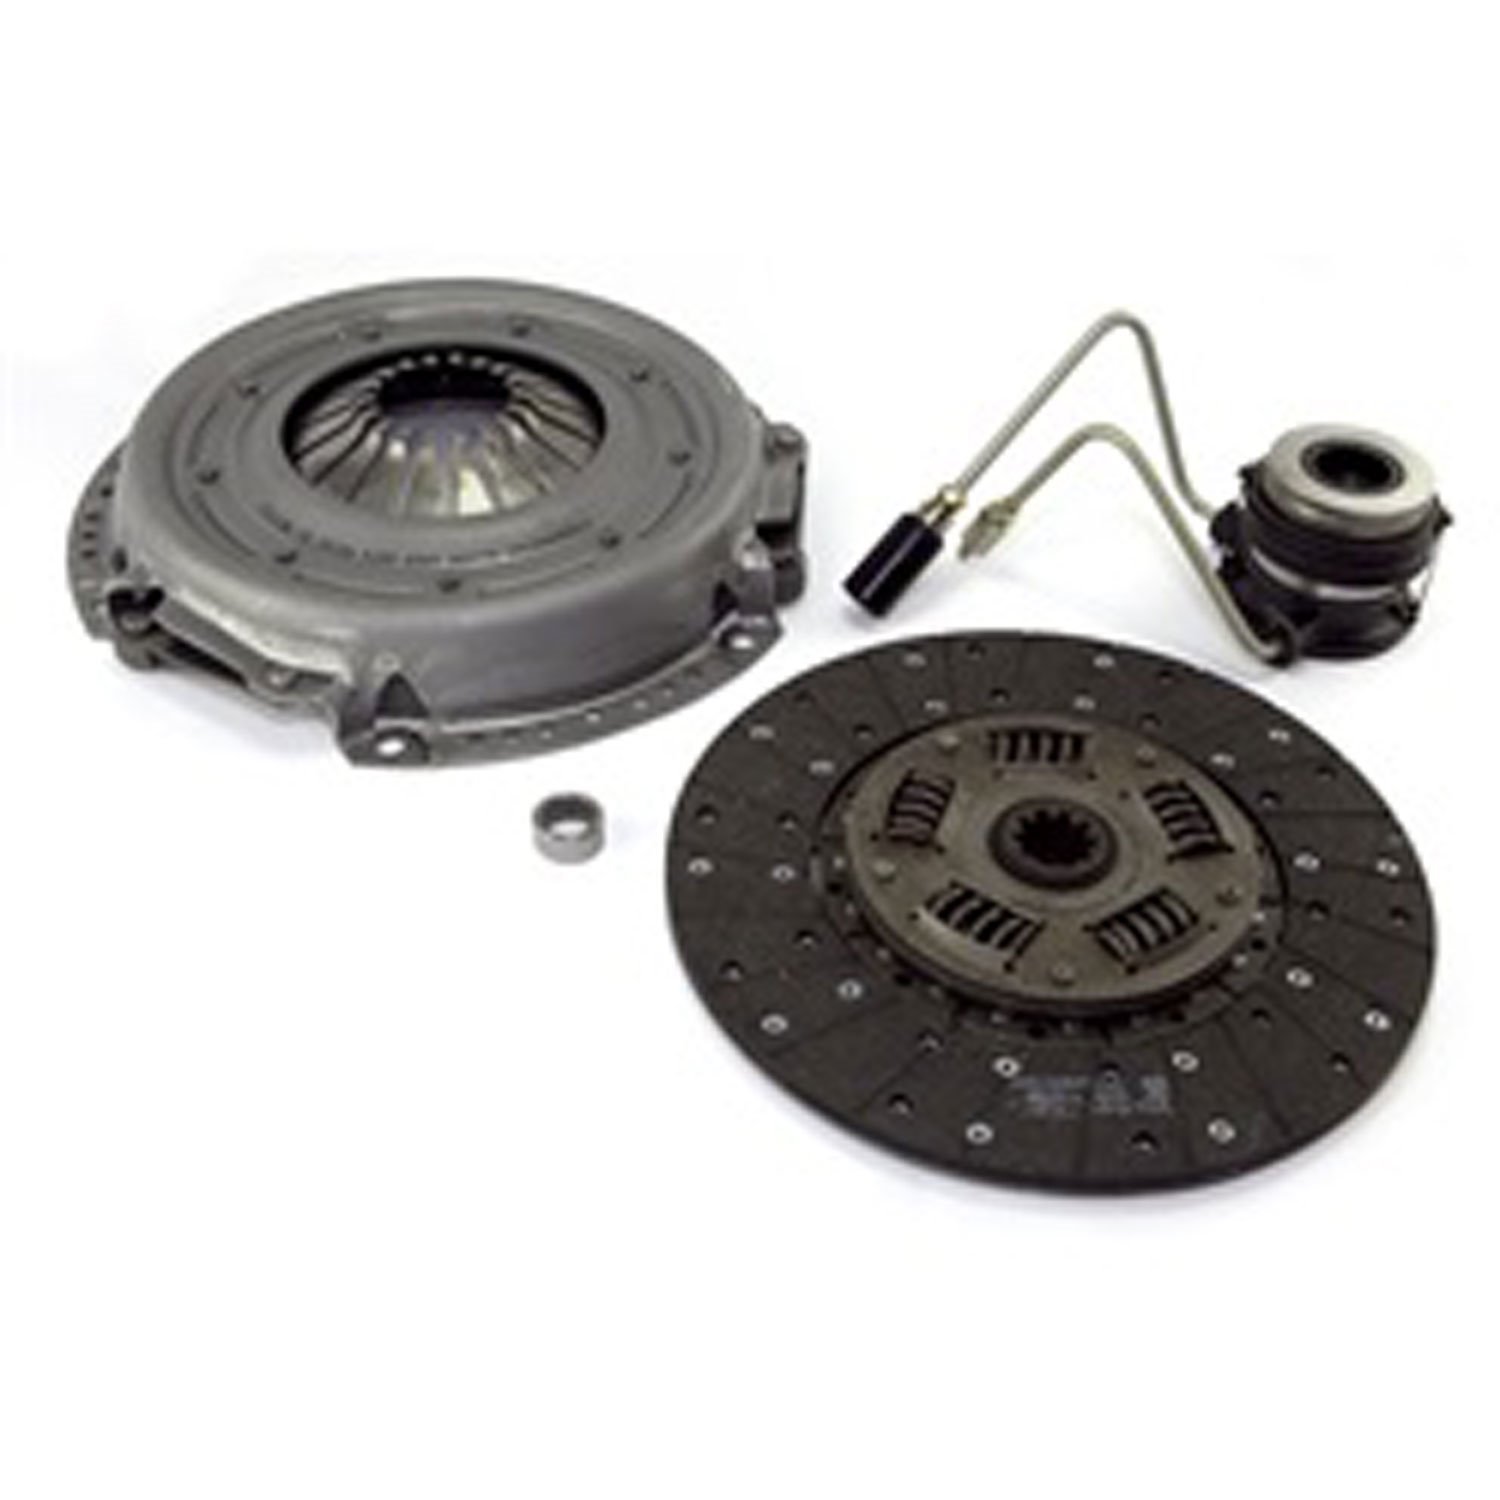 Master Clutch Kit 92 Cherokee and Wrangler 4.0L. The master kit includes the pressure plate clutch d